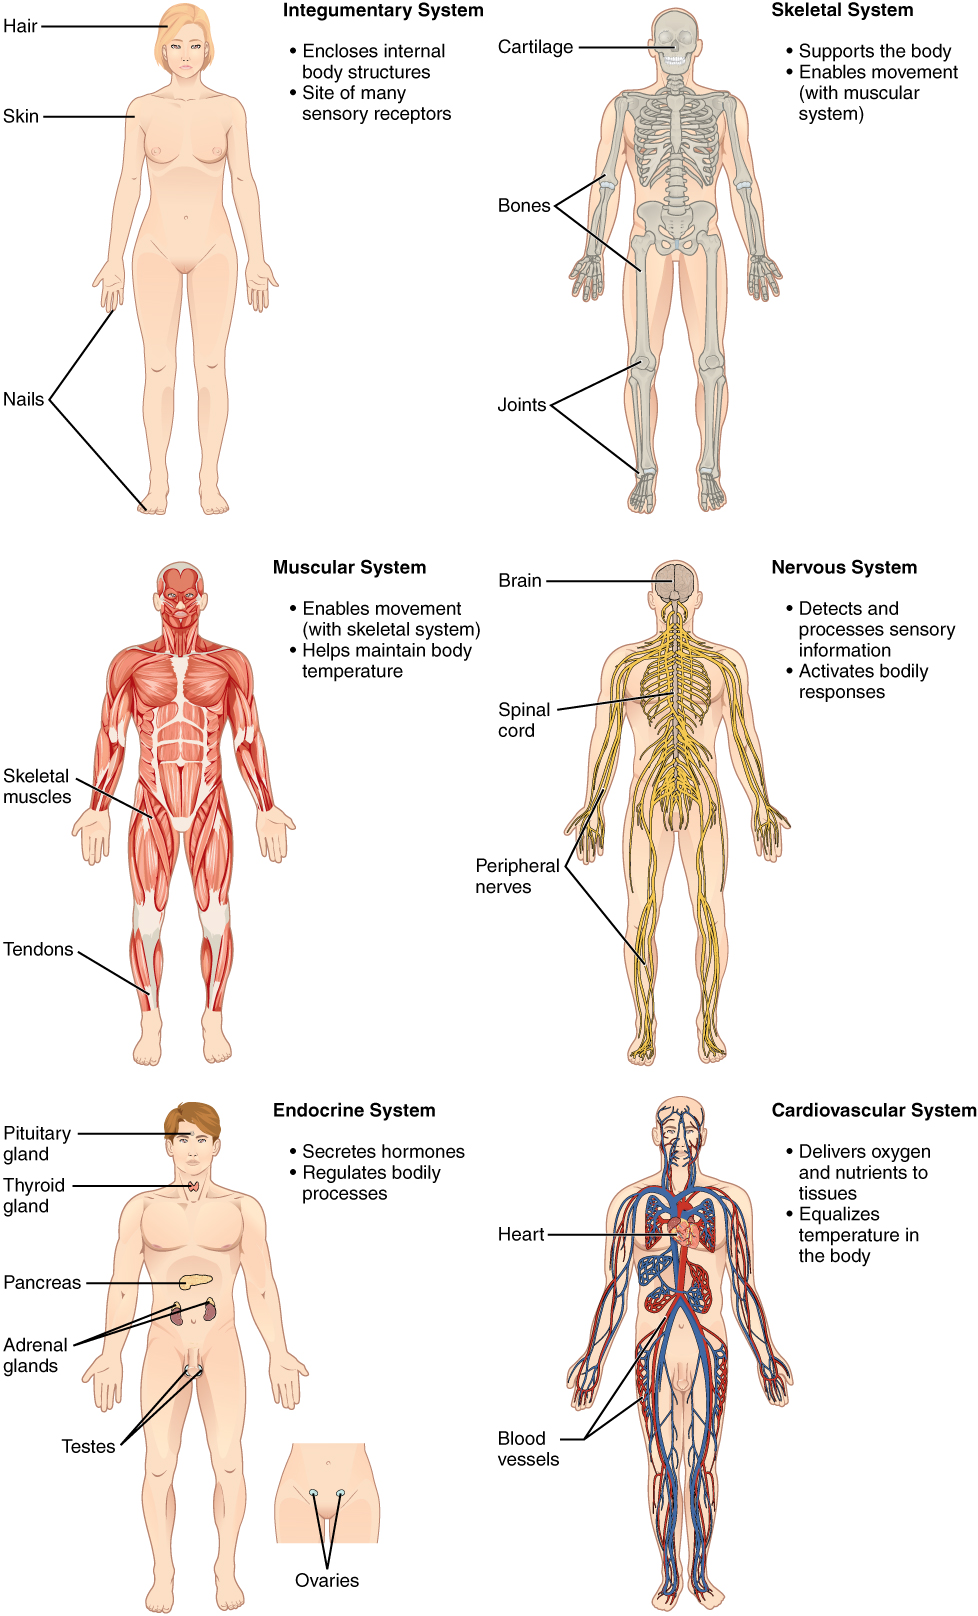 Some organ systems of the human body: the integumentary system, skeletal system, muscular system, nervous system, endocrine system, and the cardiovascular system - described in text.